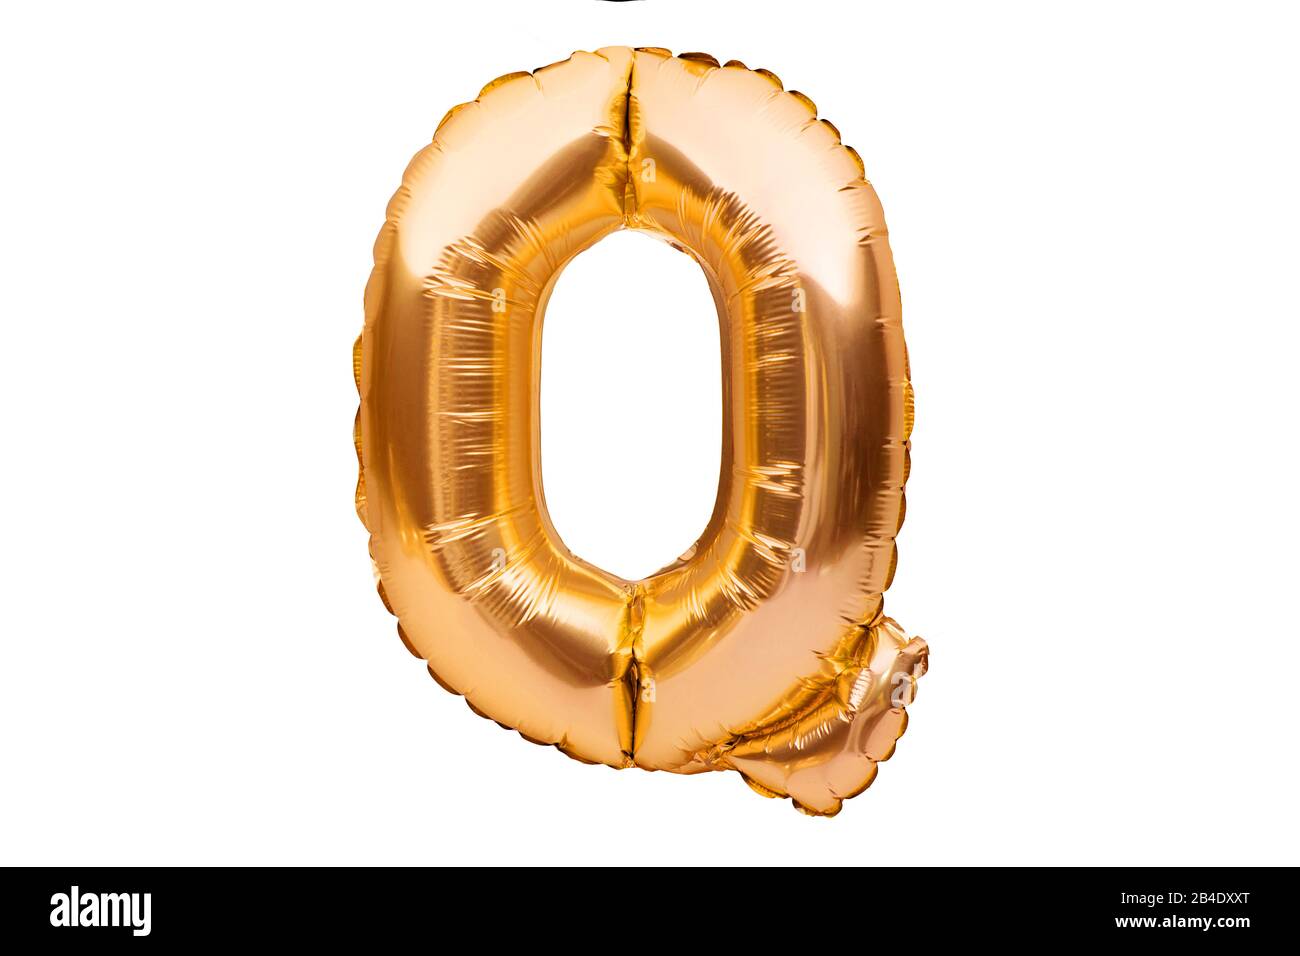 Letter Q made of golden inflatable helium balloon isolated on white. Gold foil balloon font part of full alphabet set of upper case letters Stock Photo